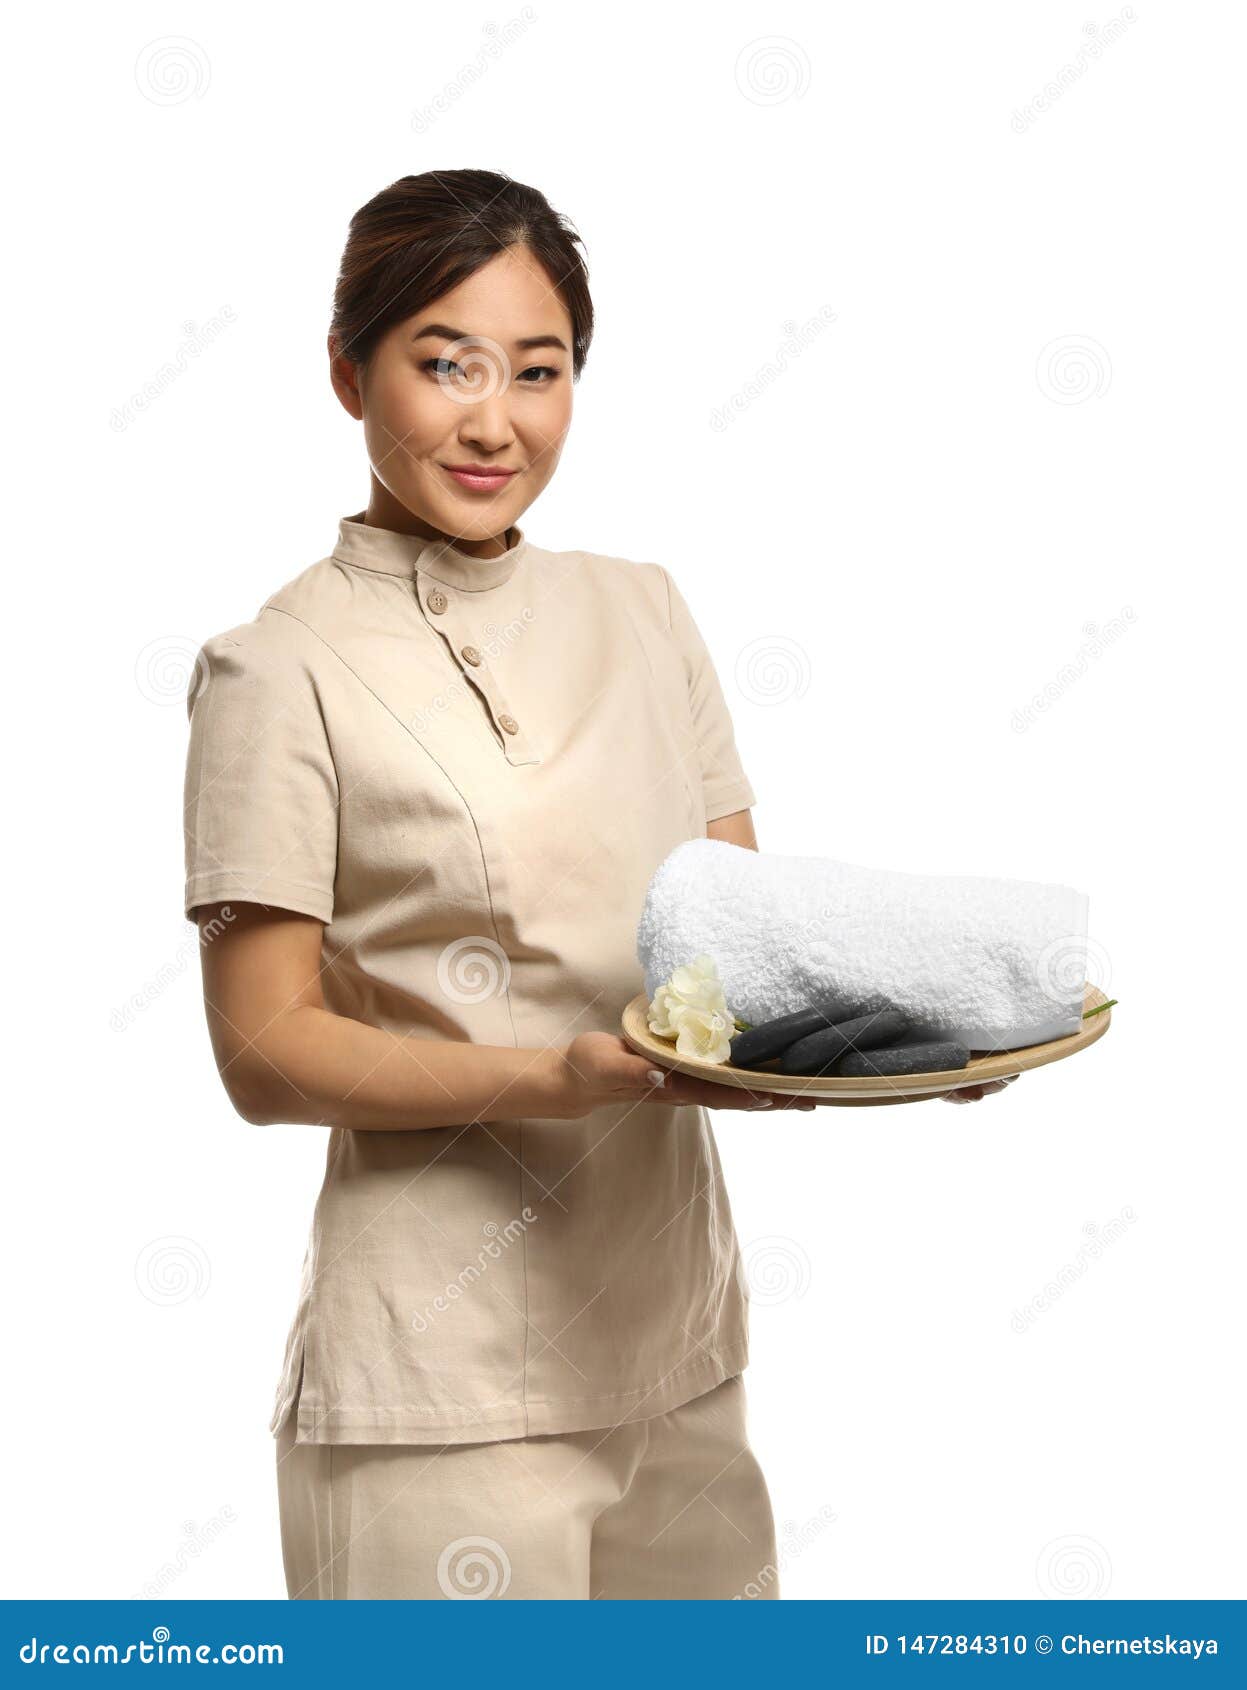 Professional Masseuse In Spa Uniform Holding Tray With Towel And Rocks